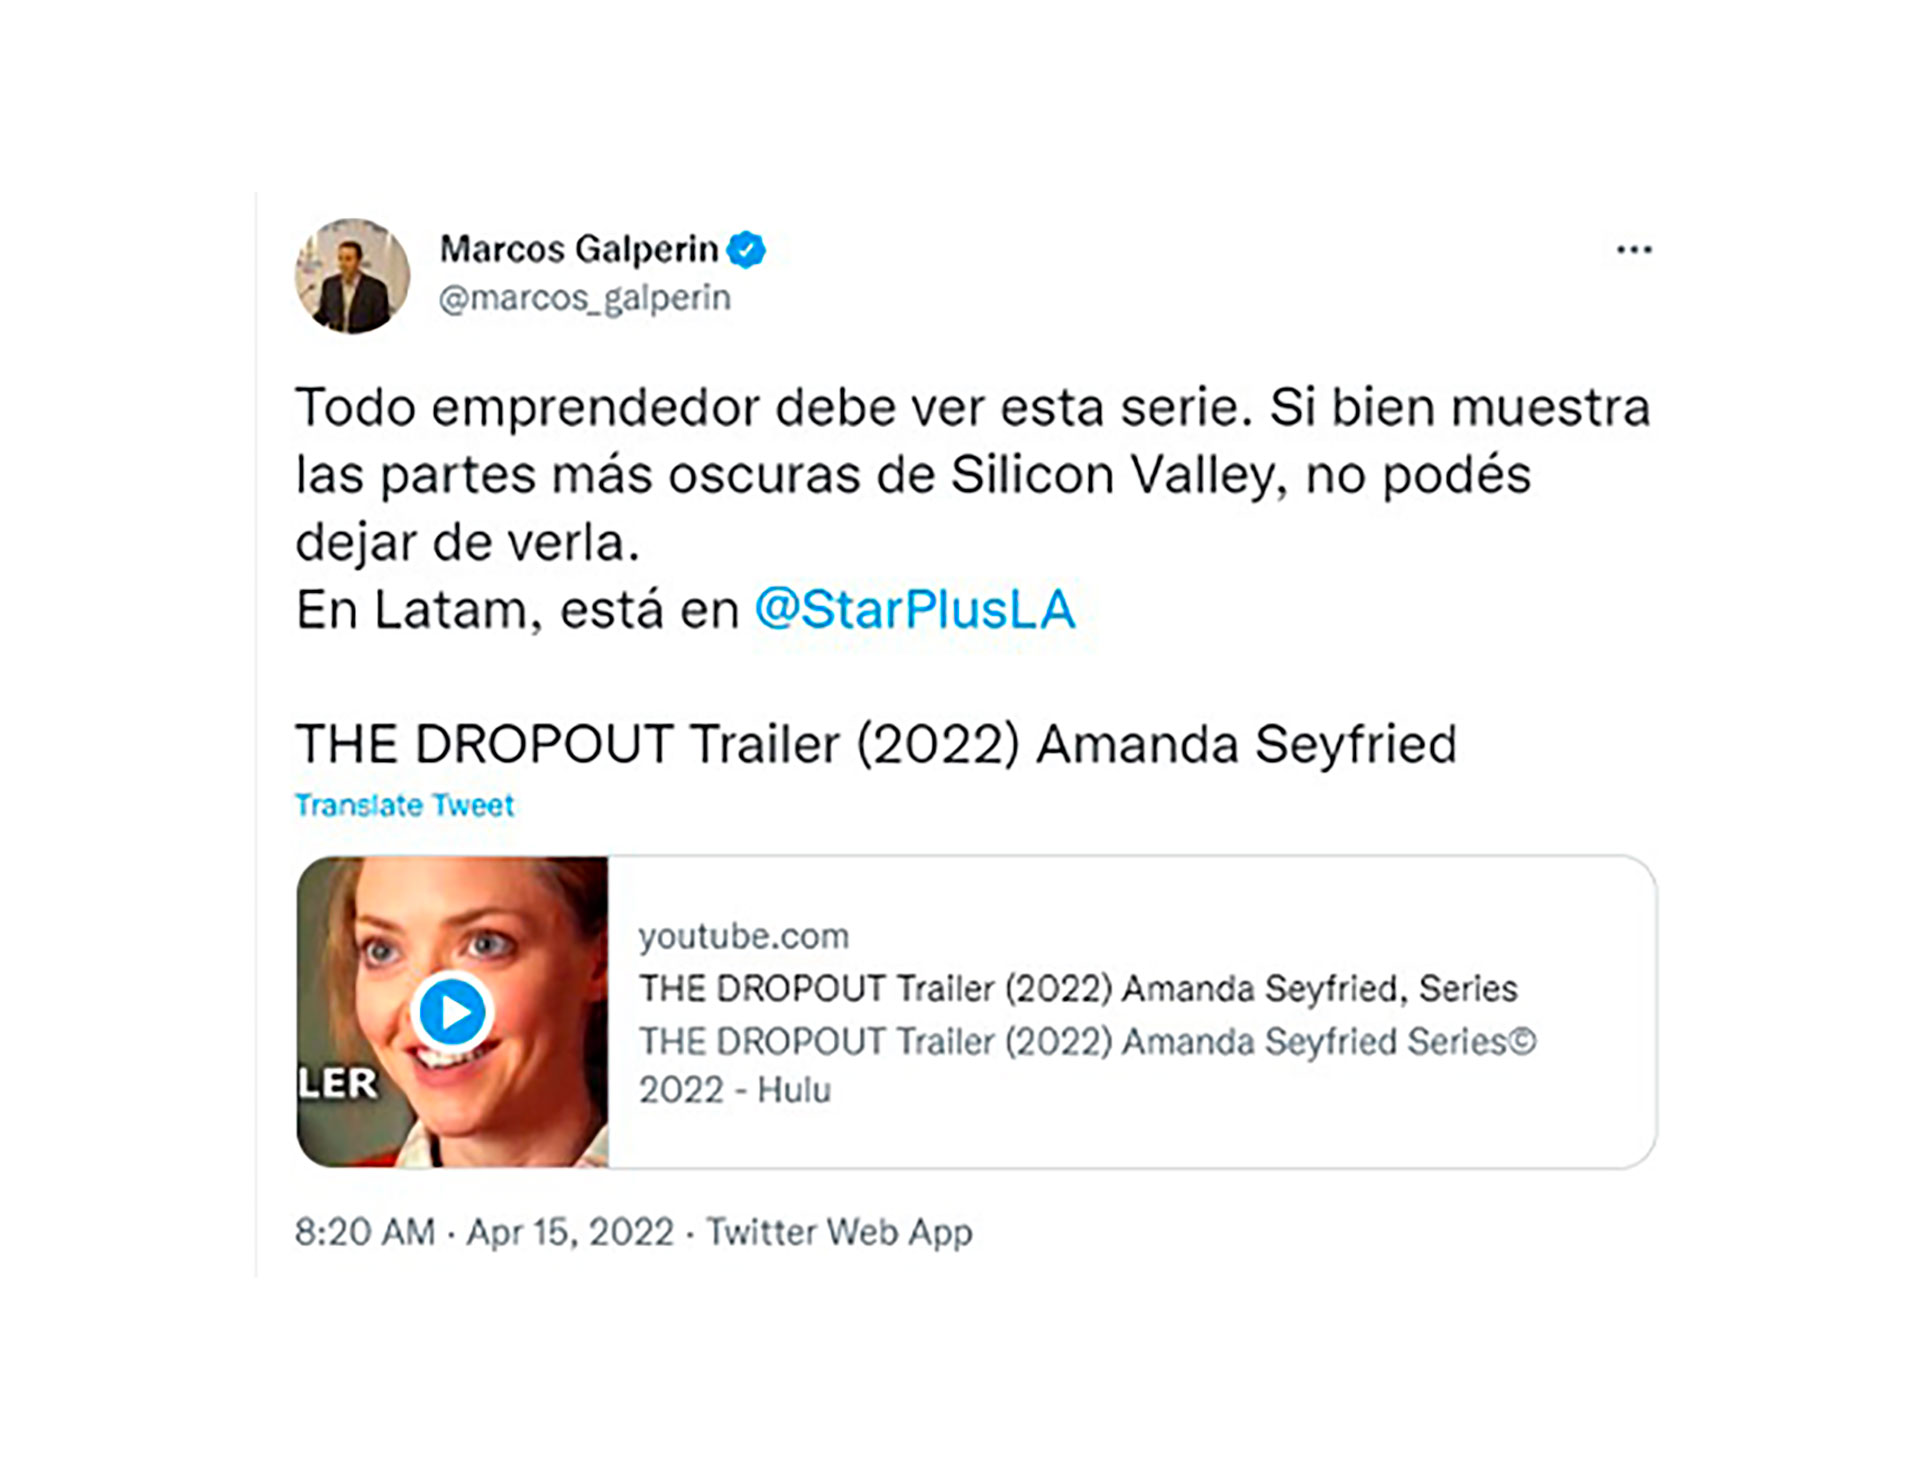 Marcos Galperin's Twitter post this Friday morning.